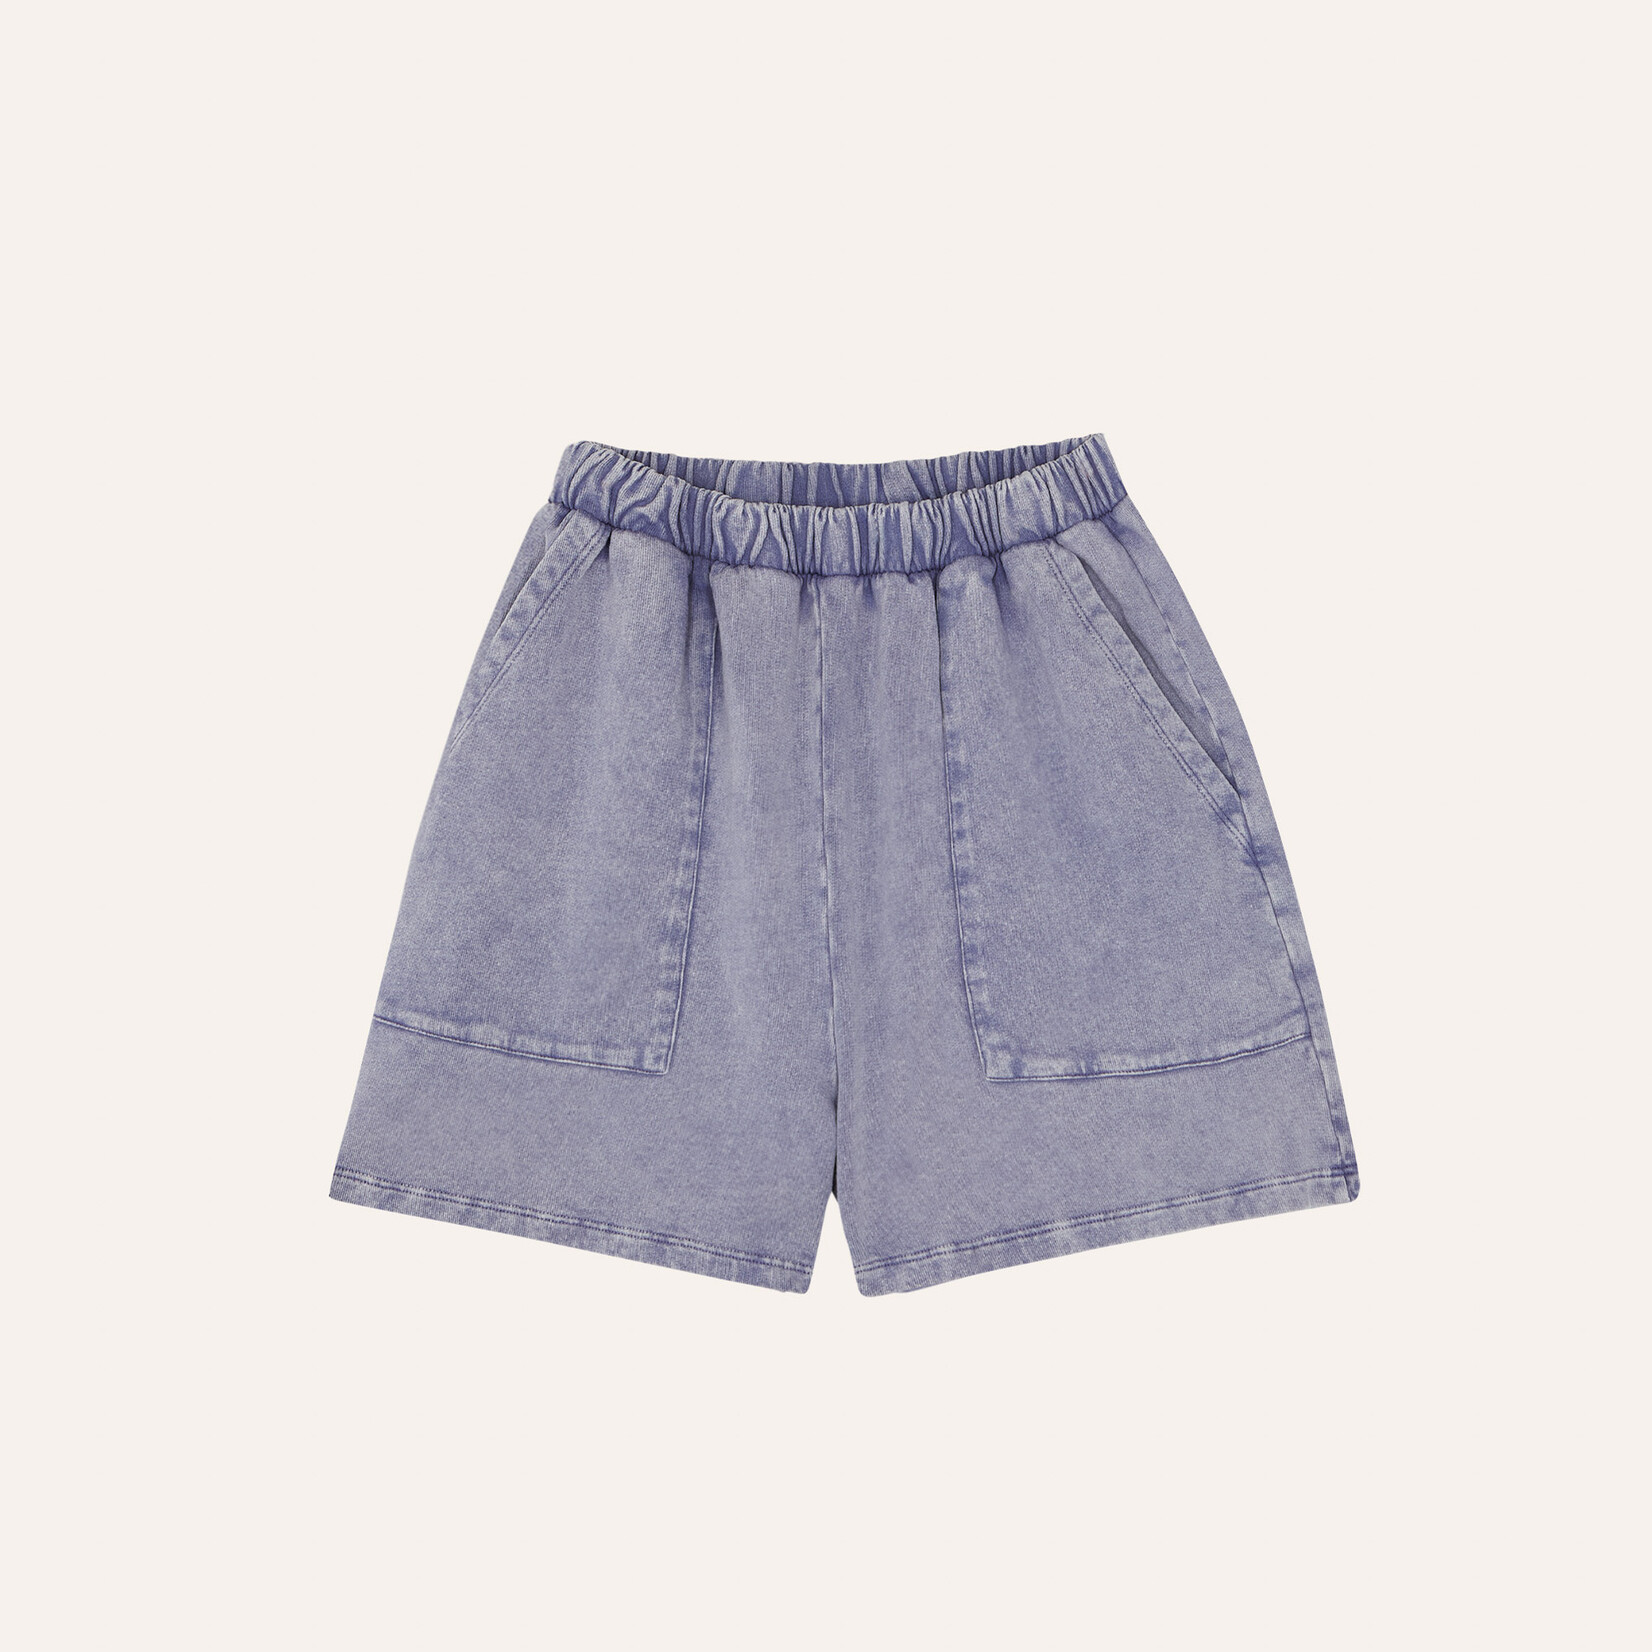 The Campamento BLUE WASHED KIDS SHORTS